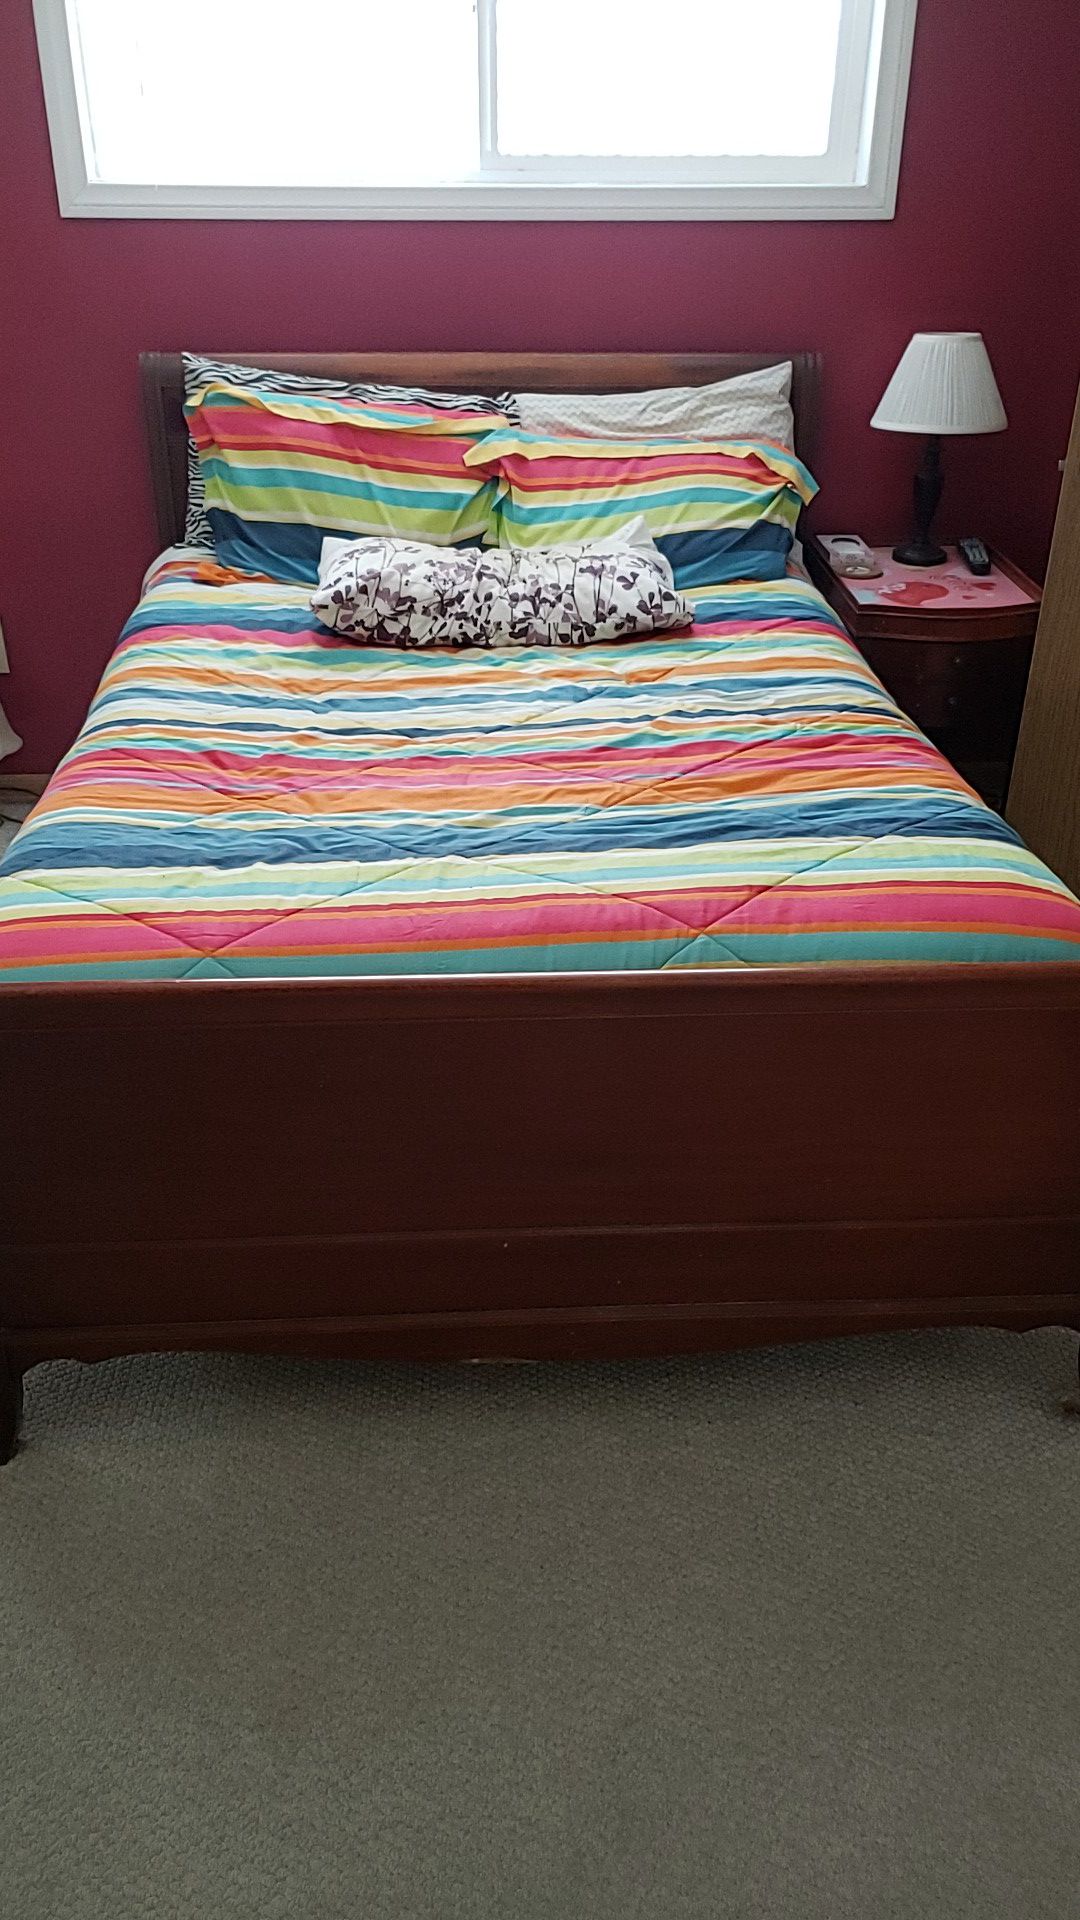 Bed frame. Make offer must go asap. Moving out of state.